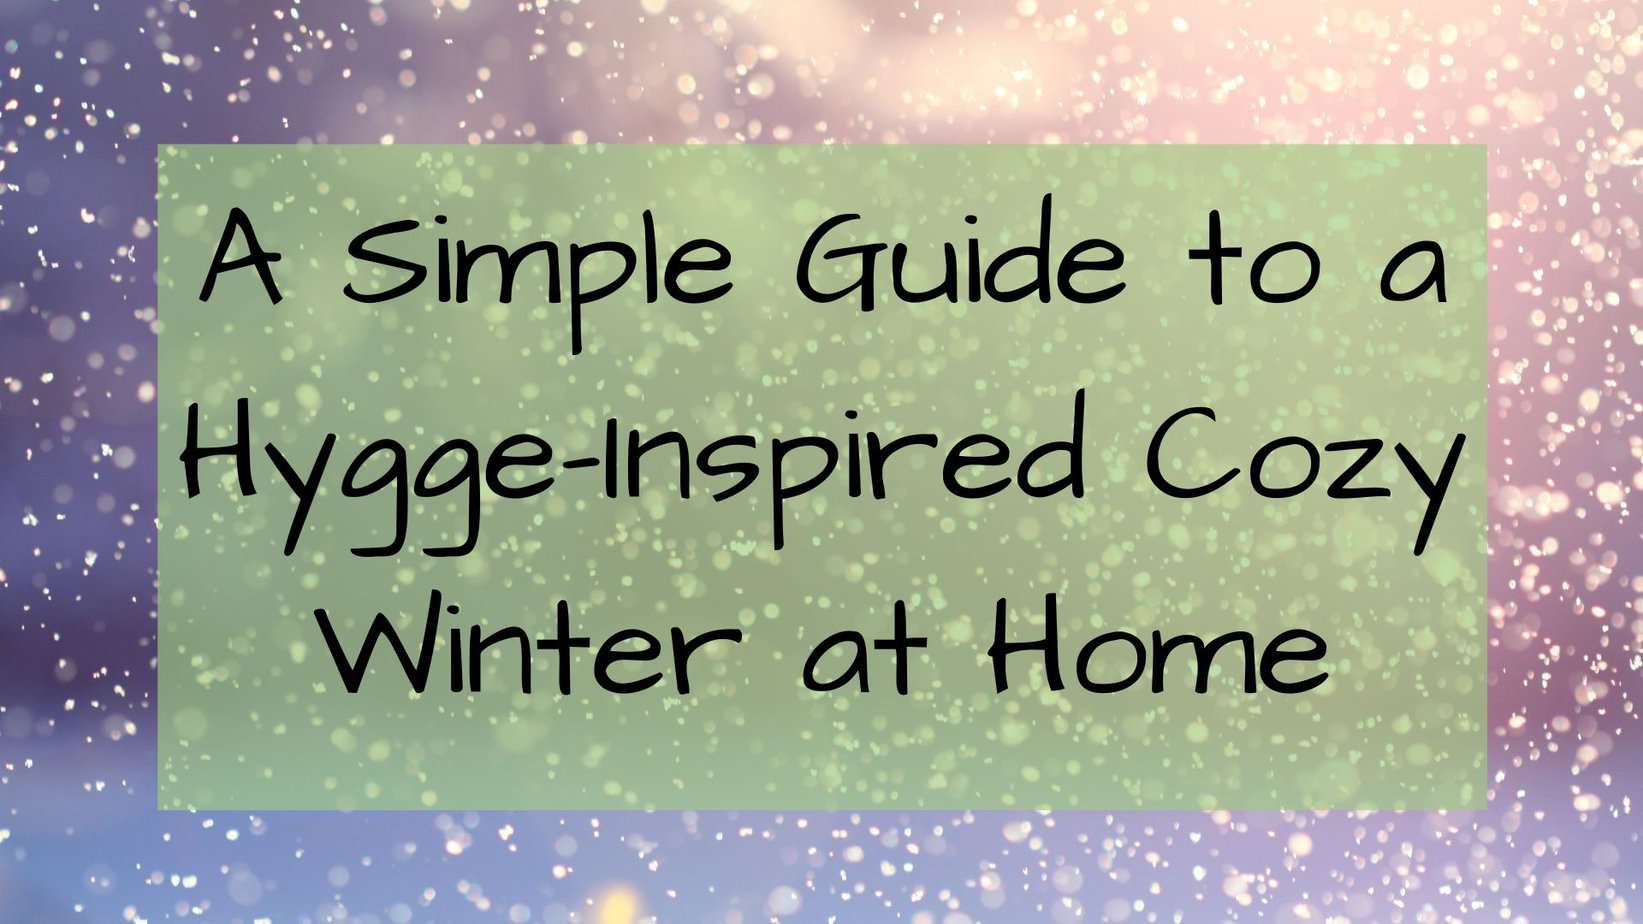 How to Add Hygge to Your House Cleaning Routine